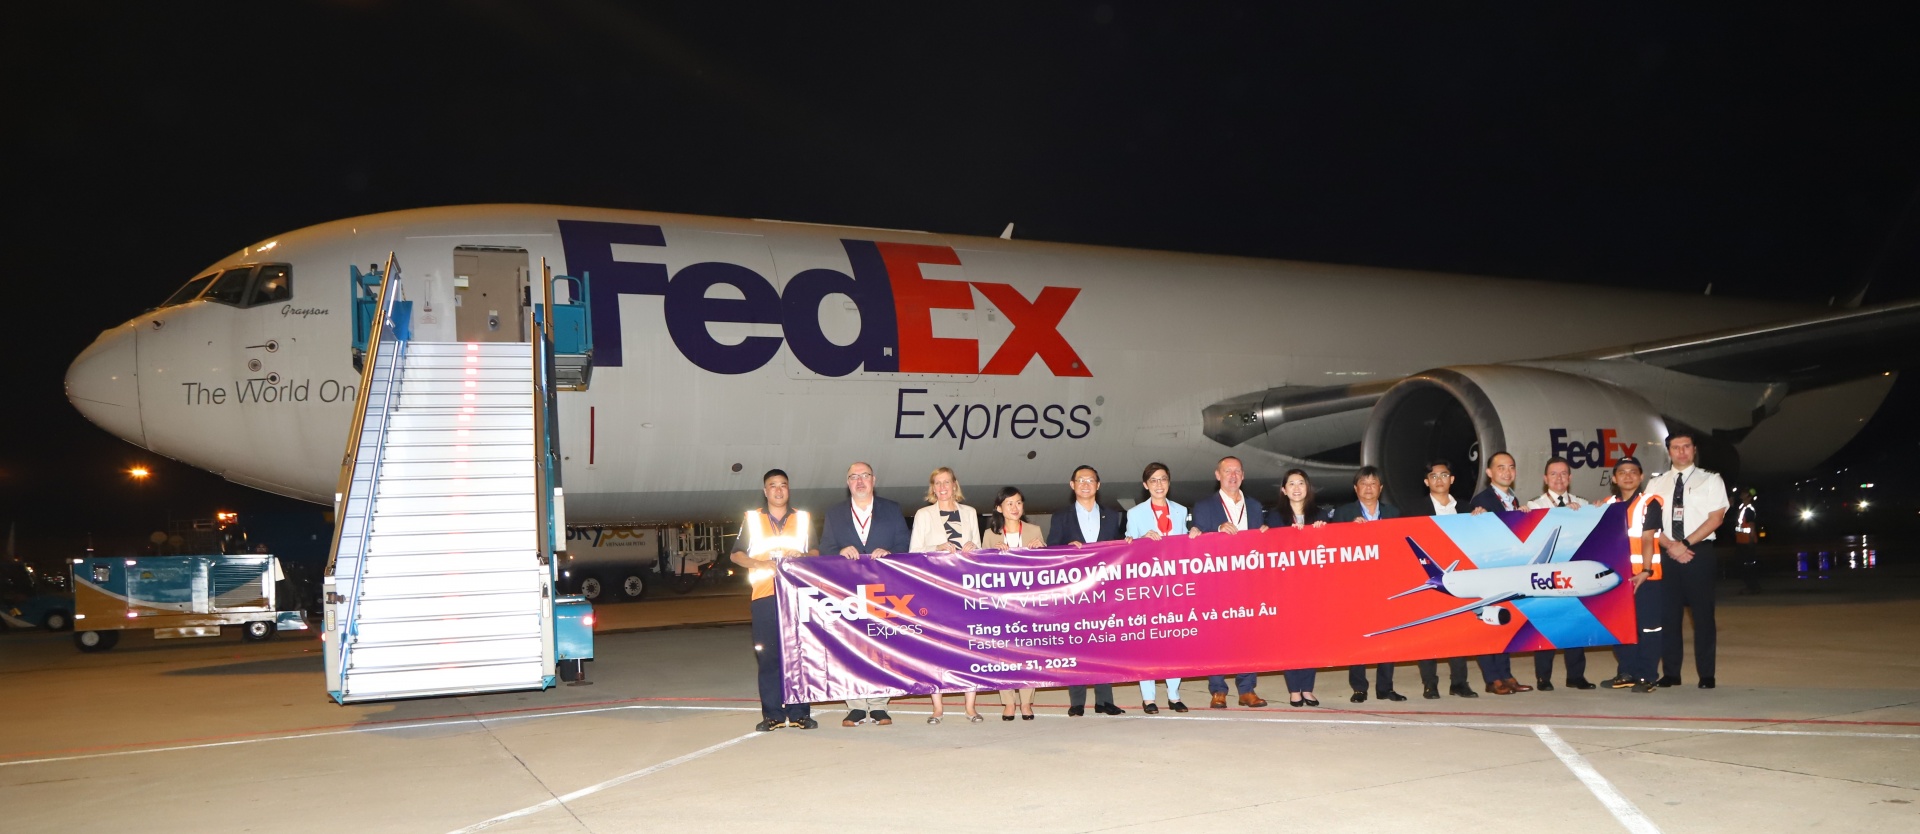 FedEx Express enhances intercontinental delivery services from Vietnam